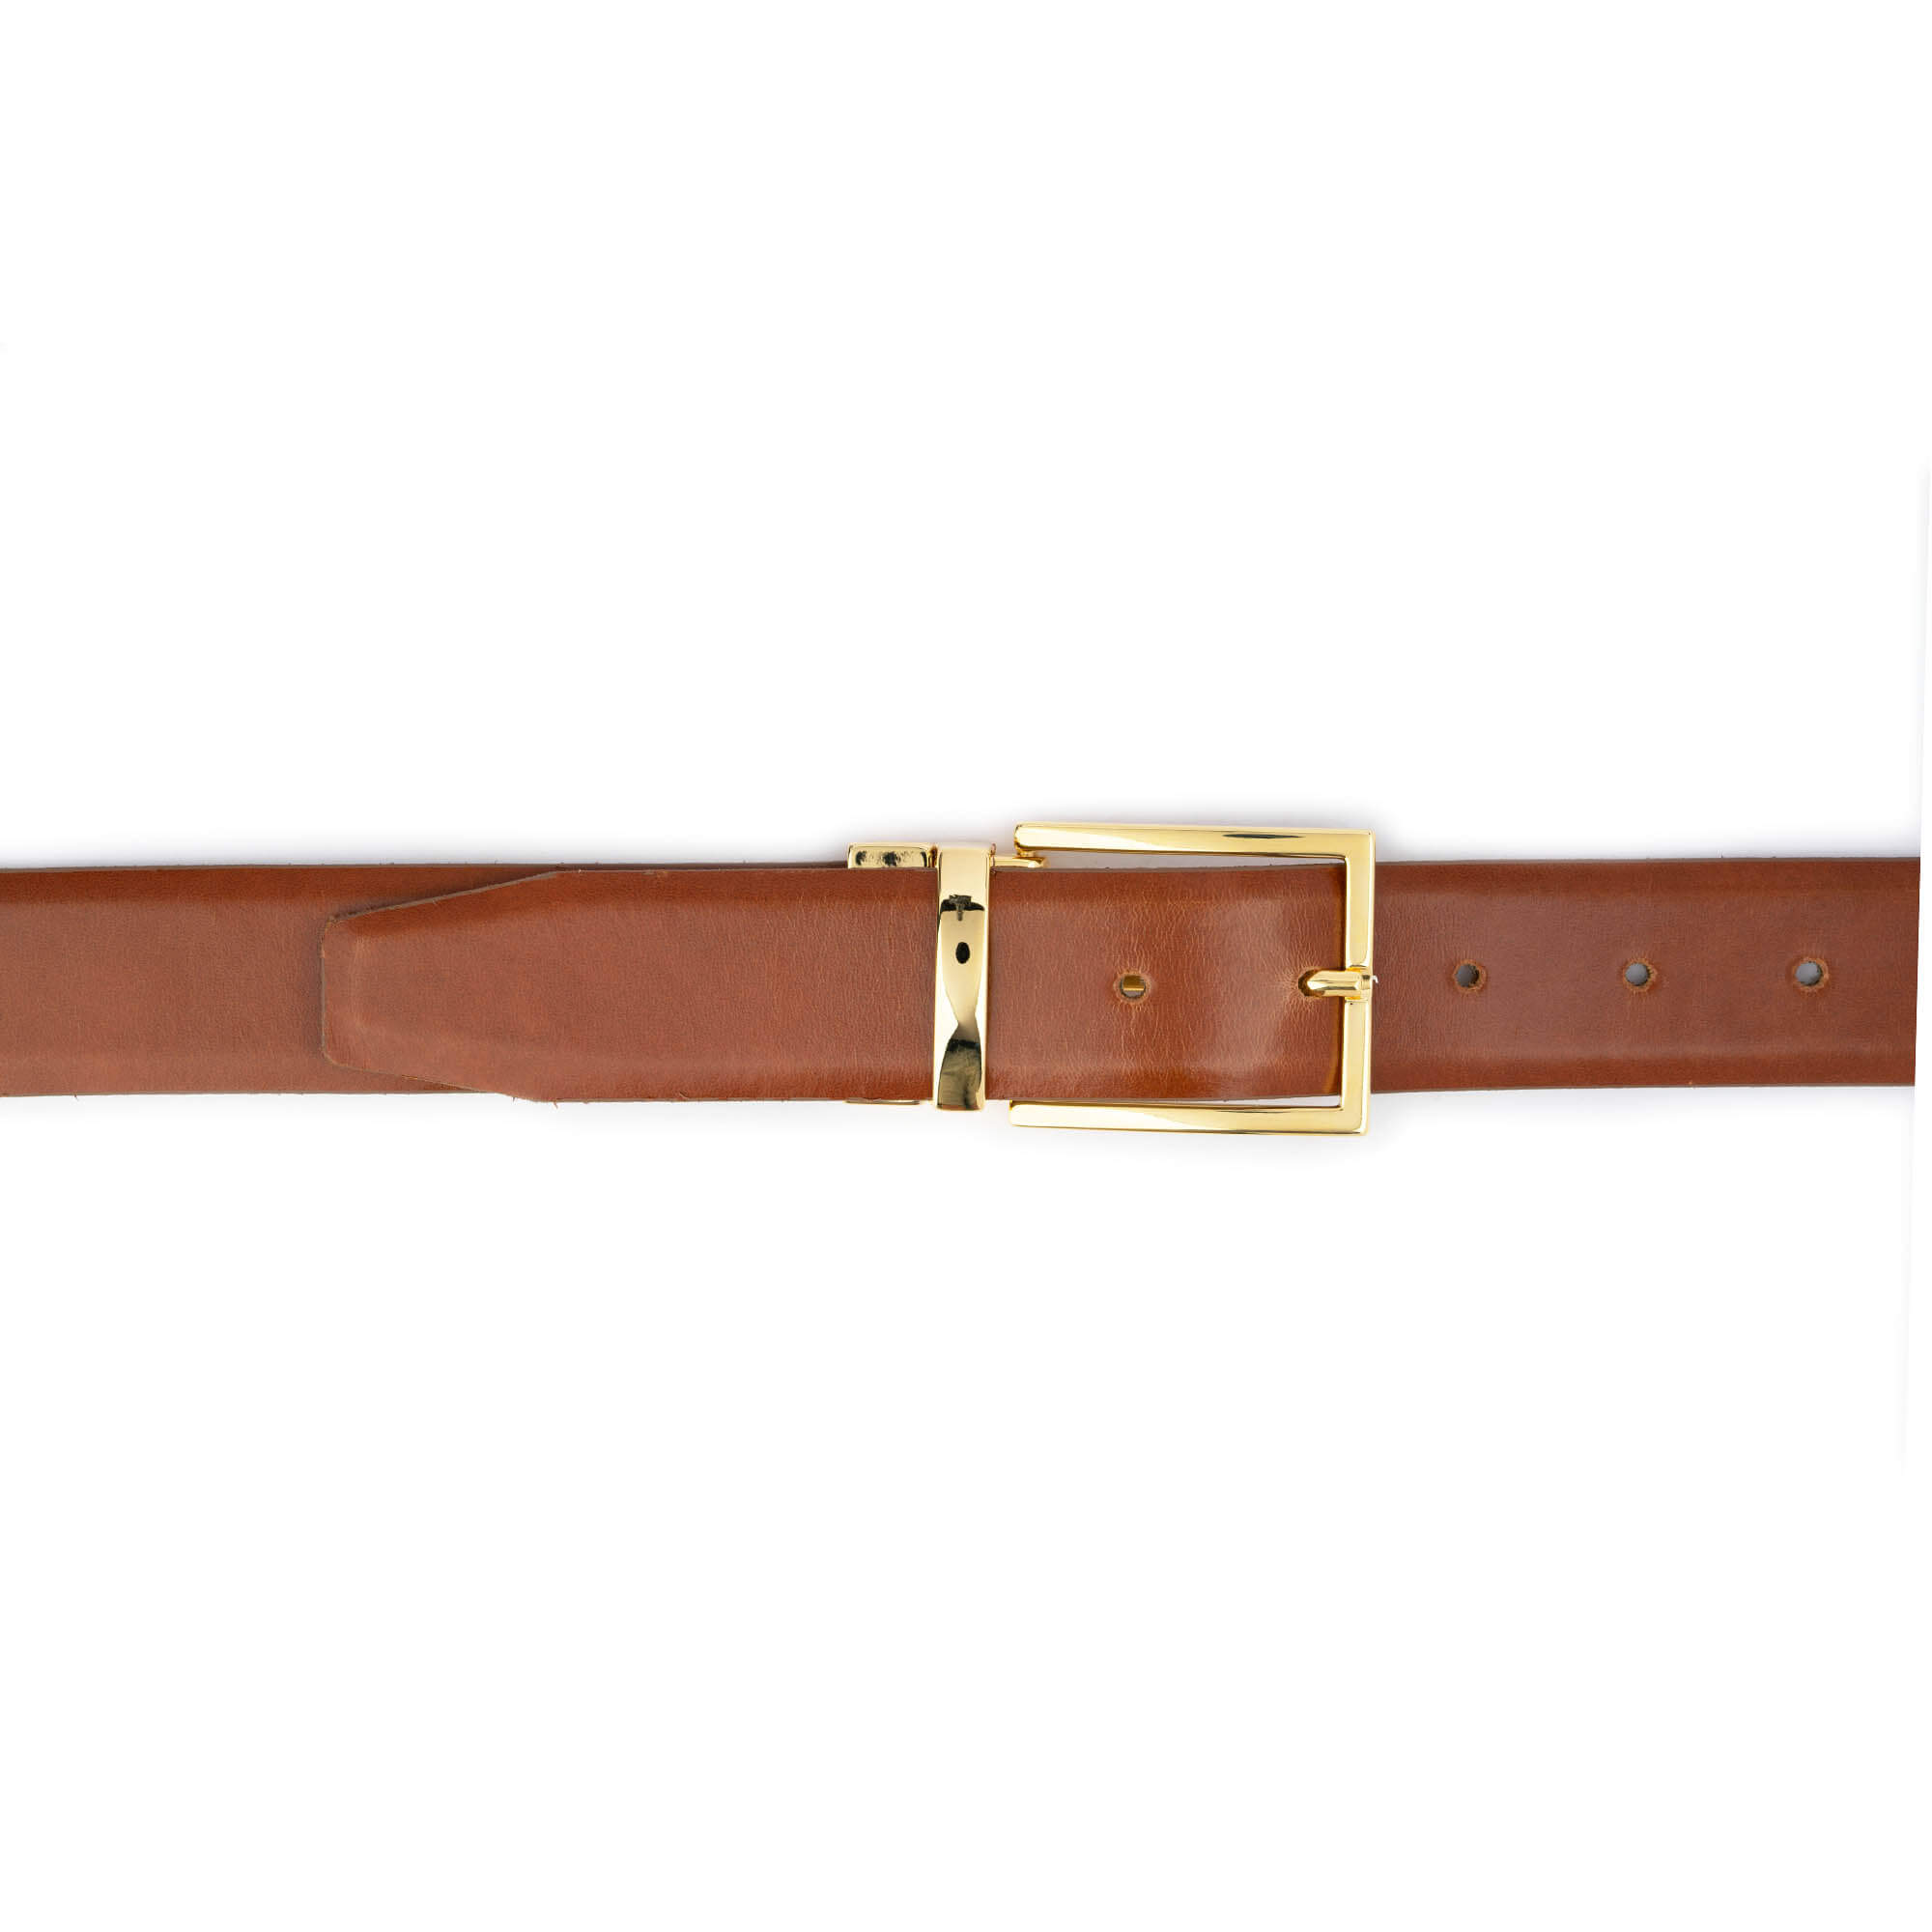 Buy Reversible Mens Brown Belt With Gold Buckle | LeatherBelts